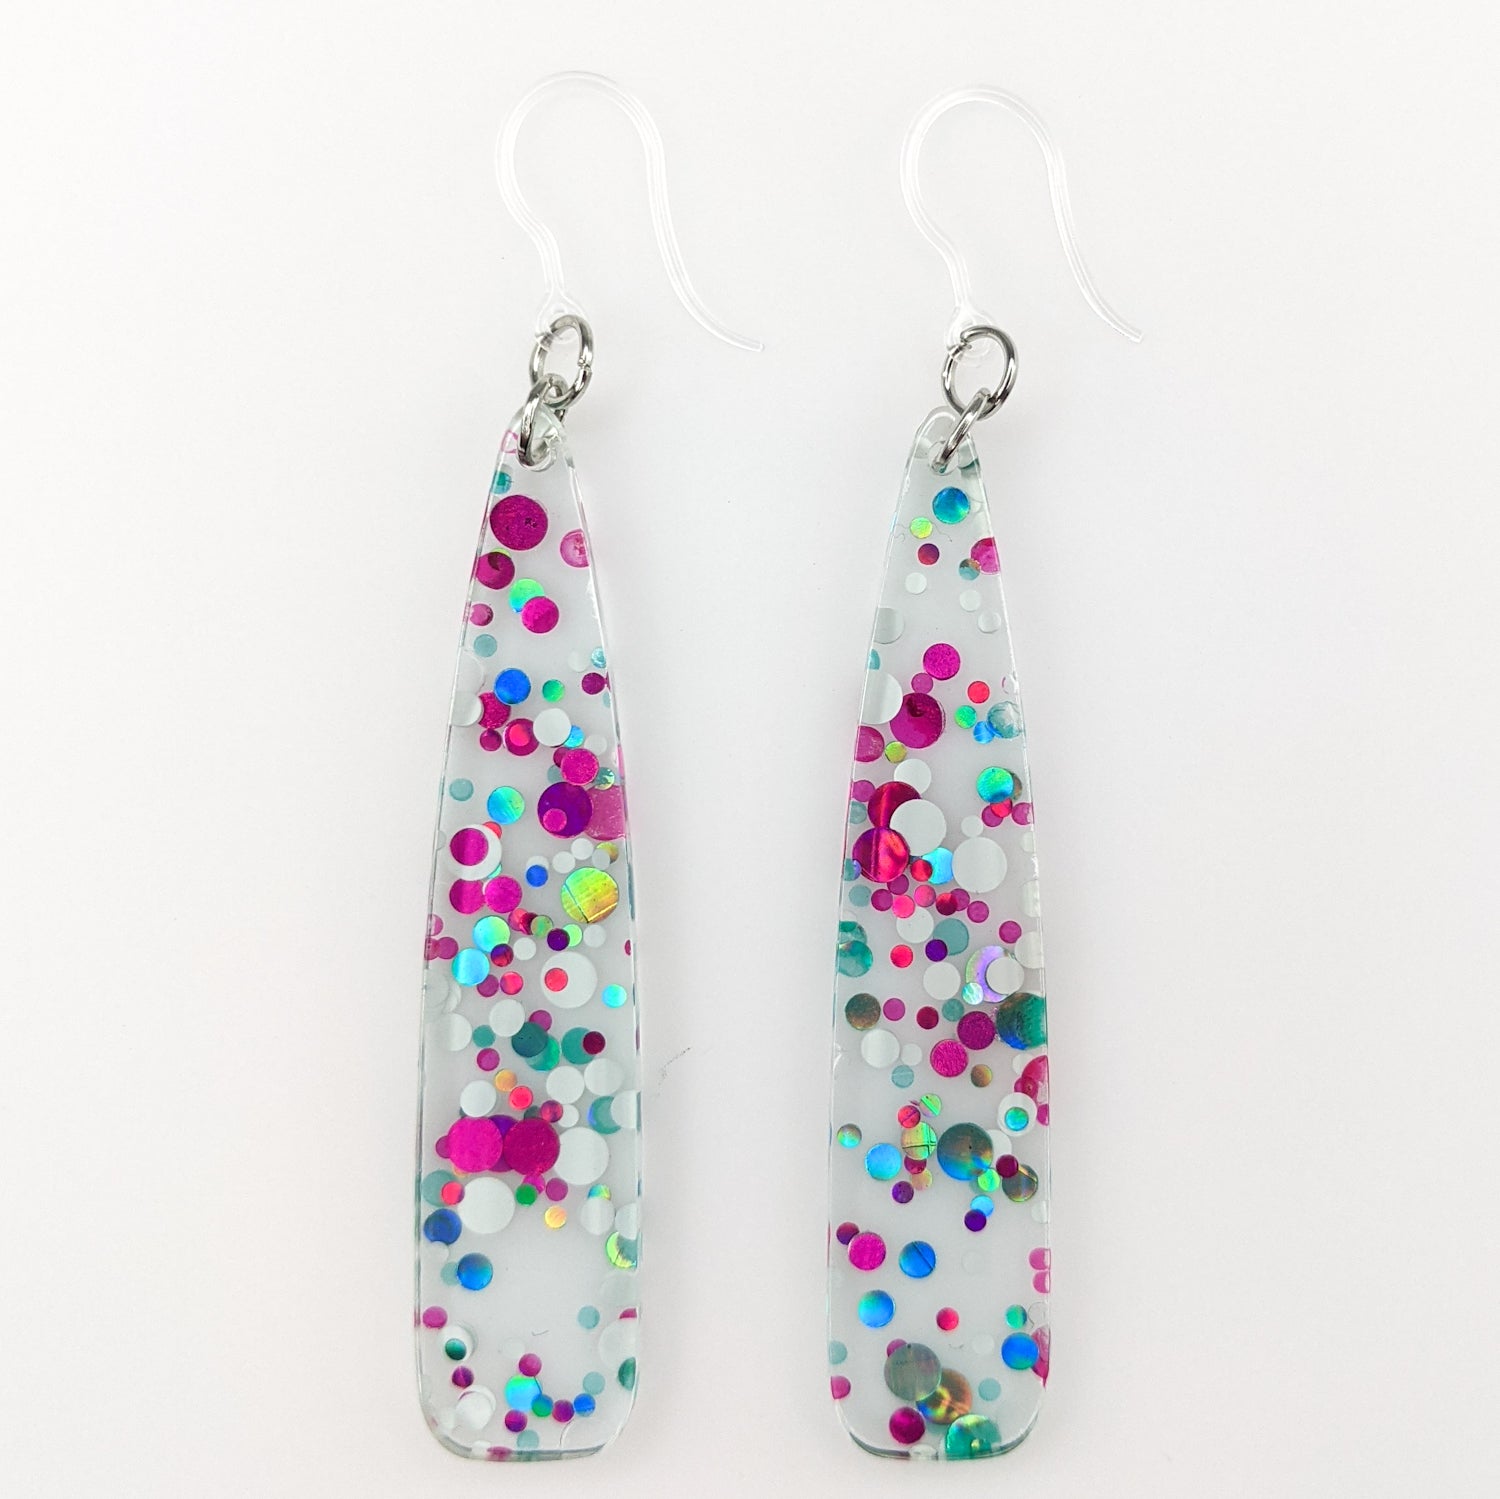 Celluloid Bubble Earrings (Dangles) - turquoise/pink/white